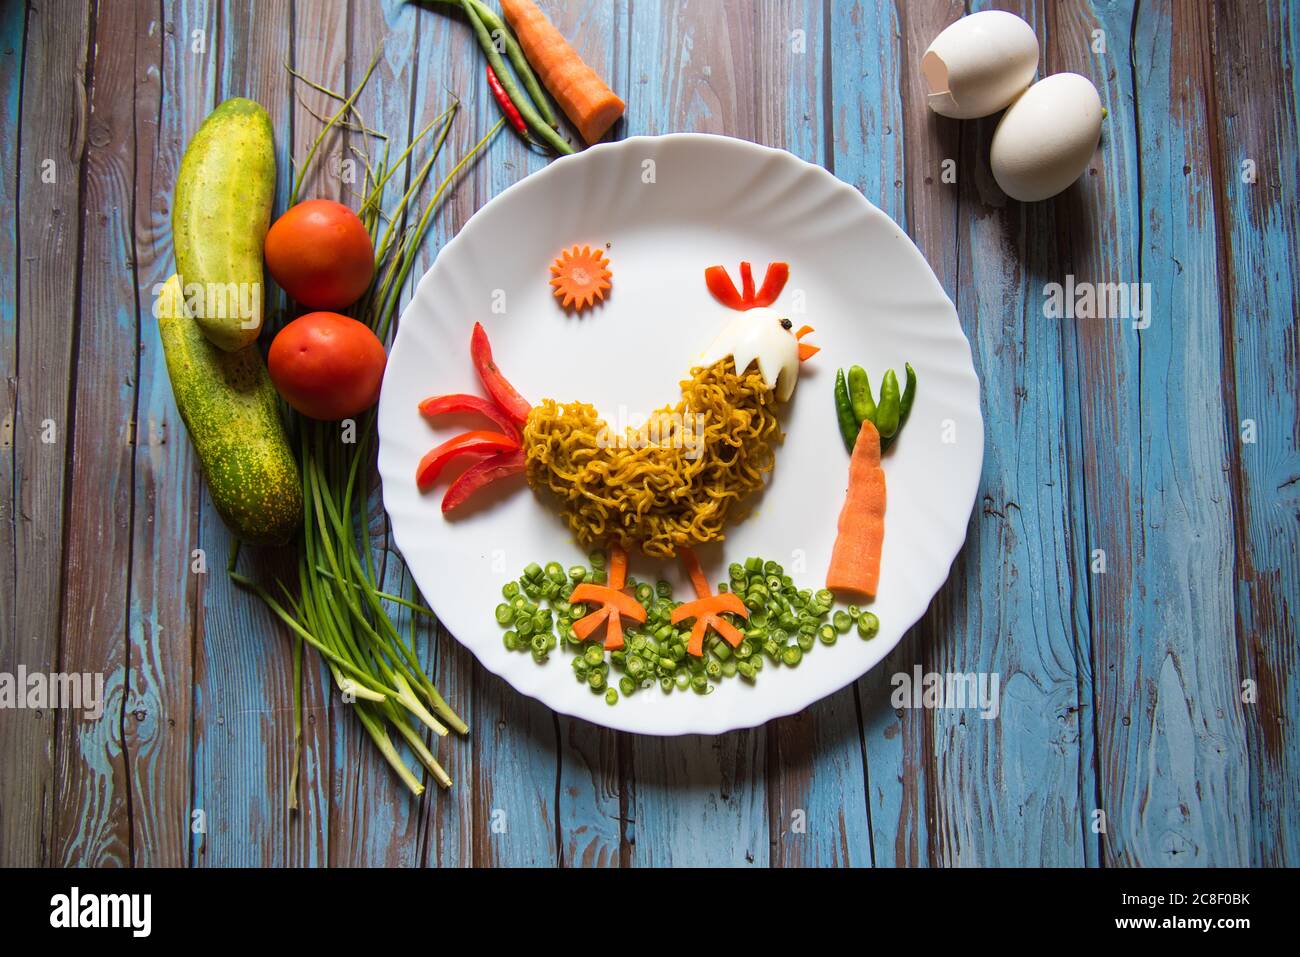 Food art and condiments on a background Stock Photo